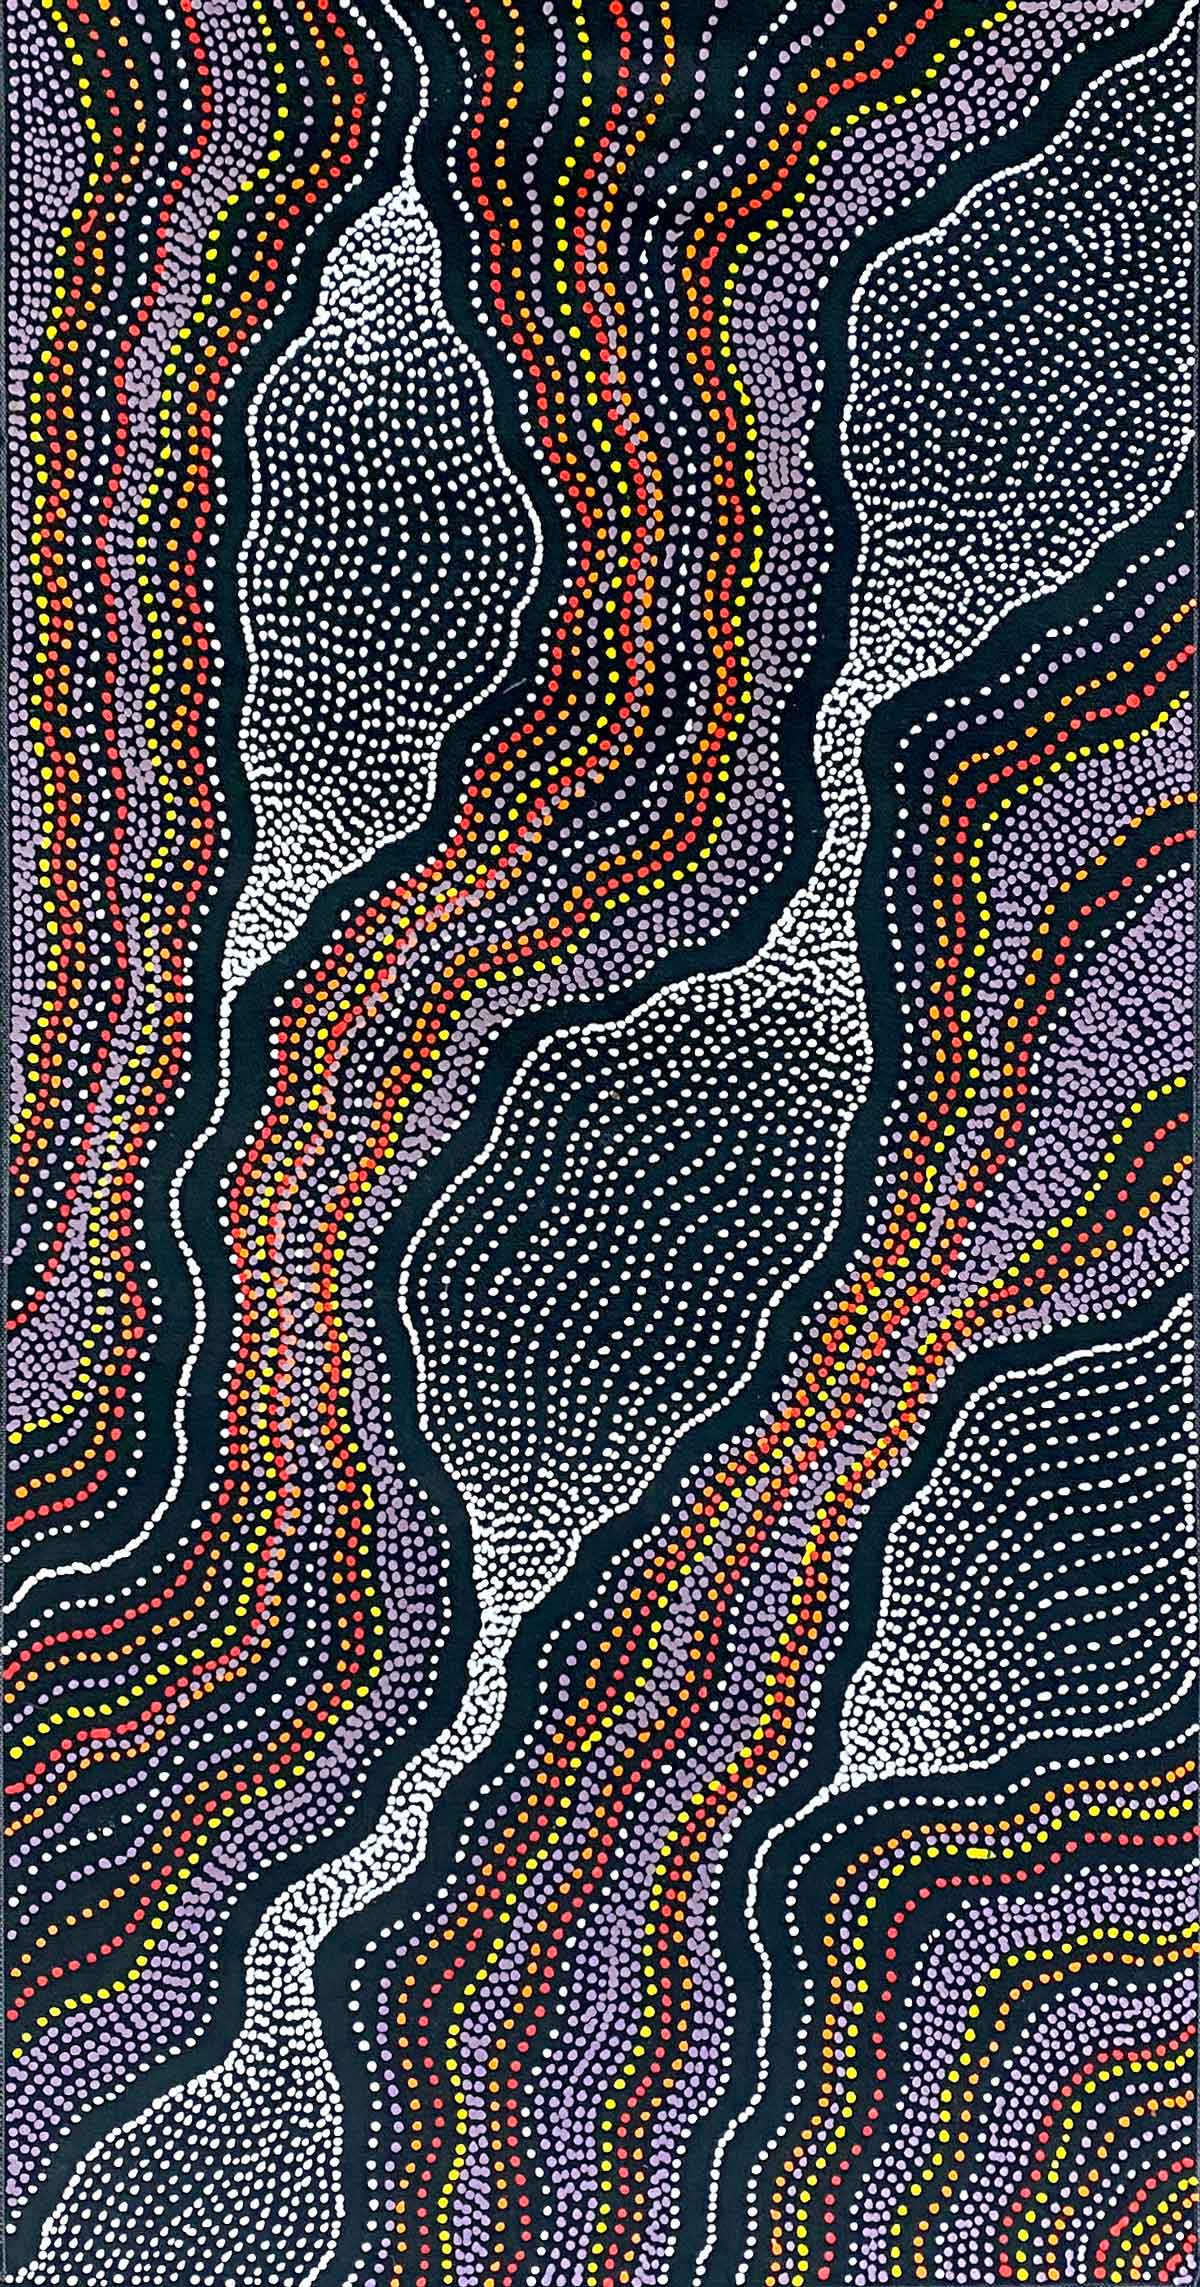 My Country by Delvine Petyarre. Australian Aboriginal painting.